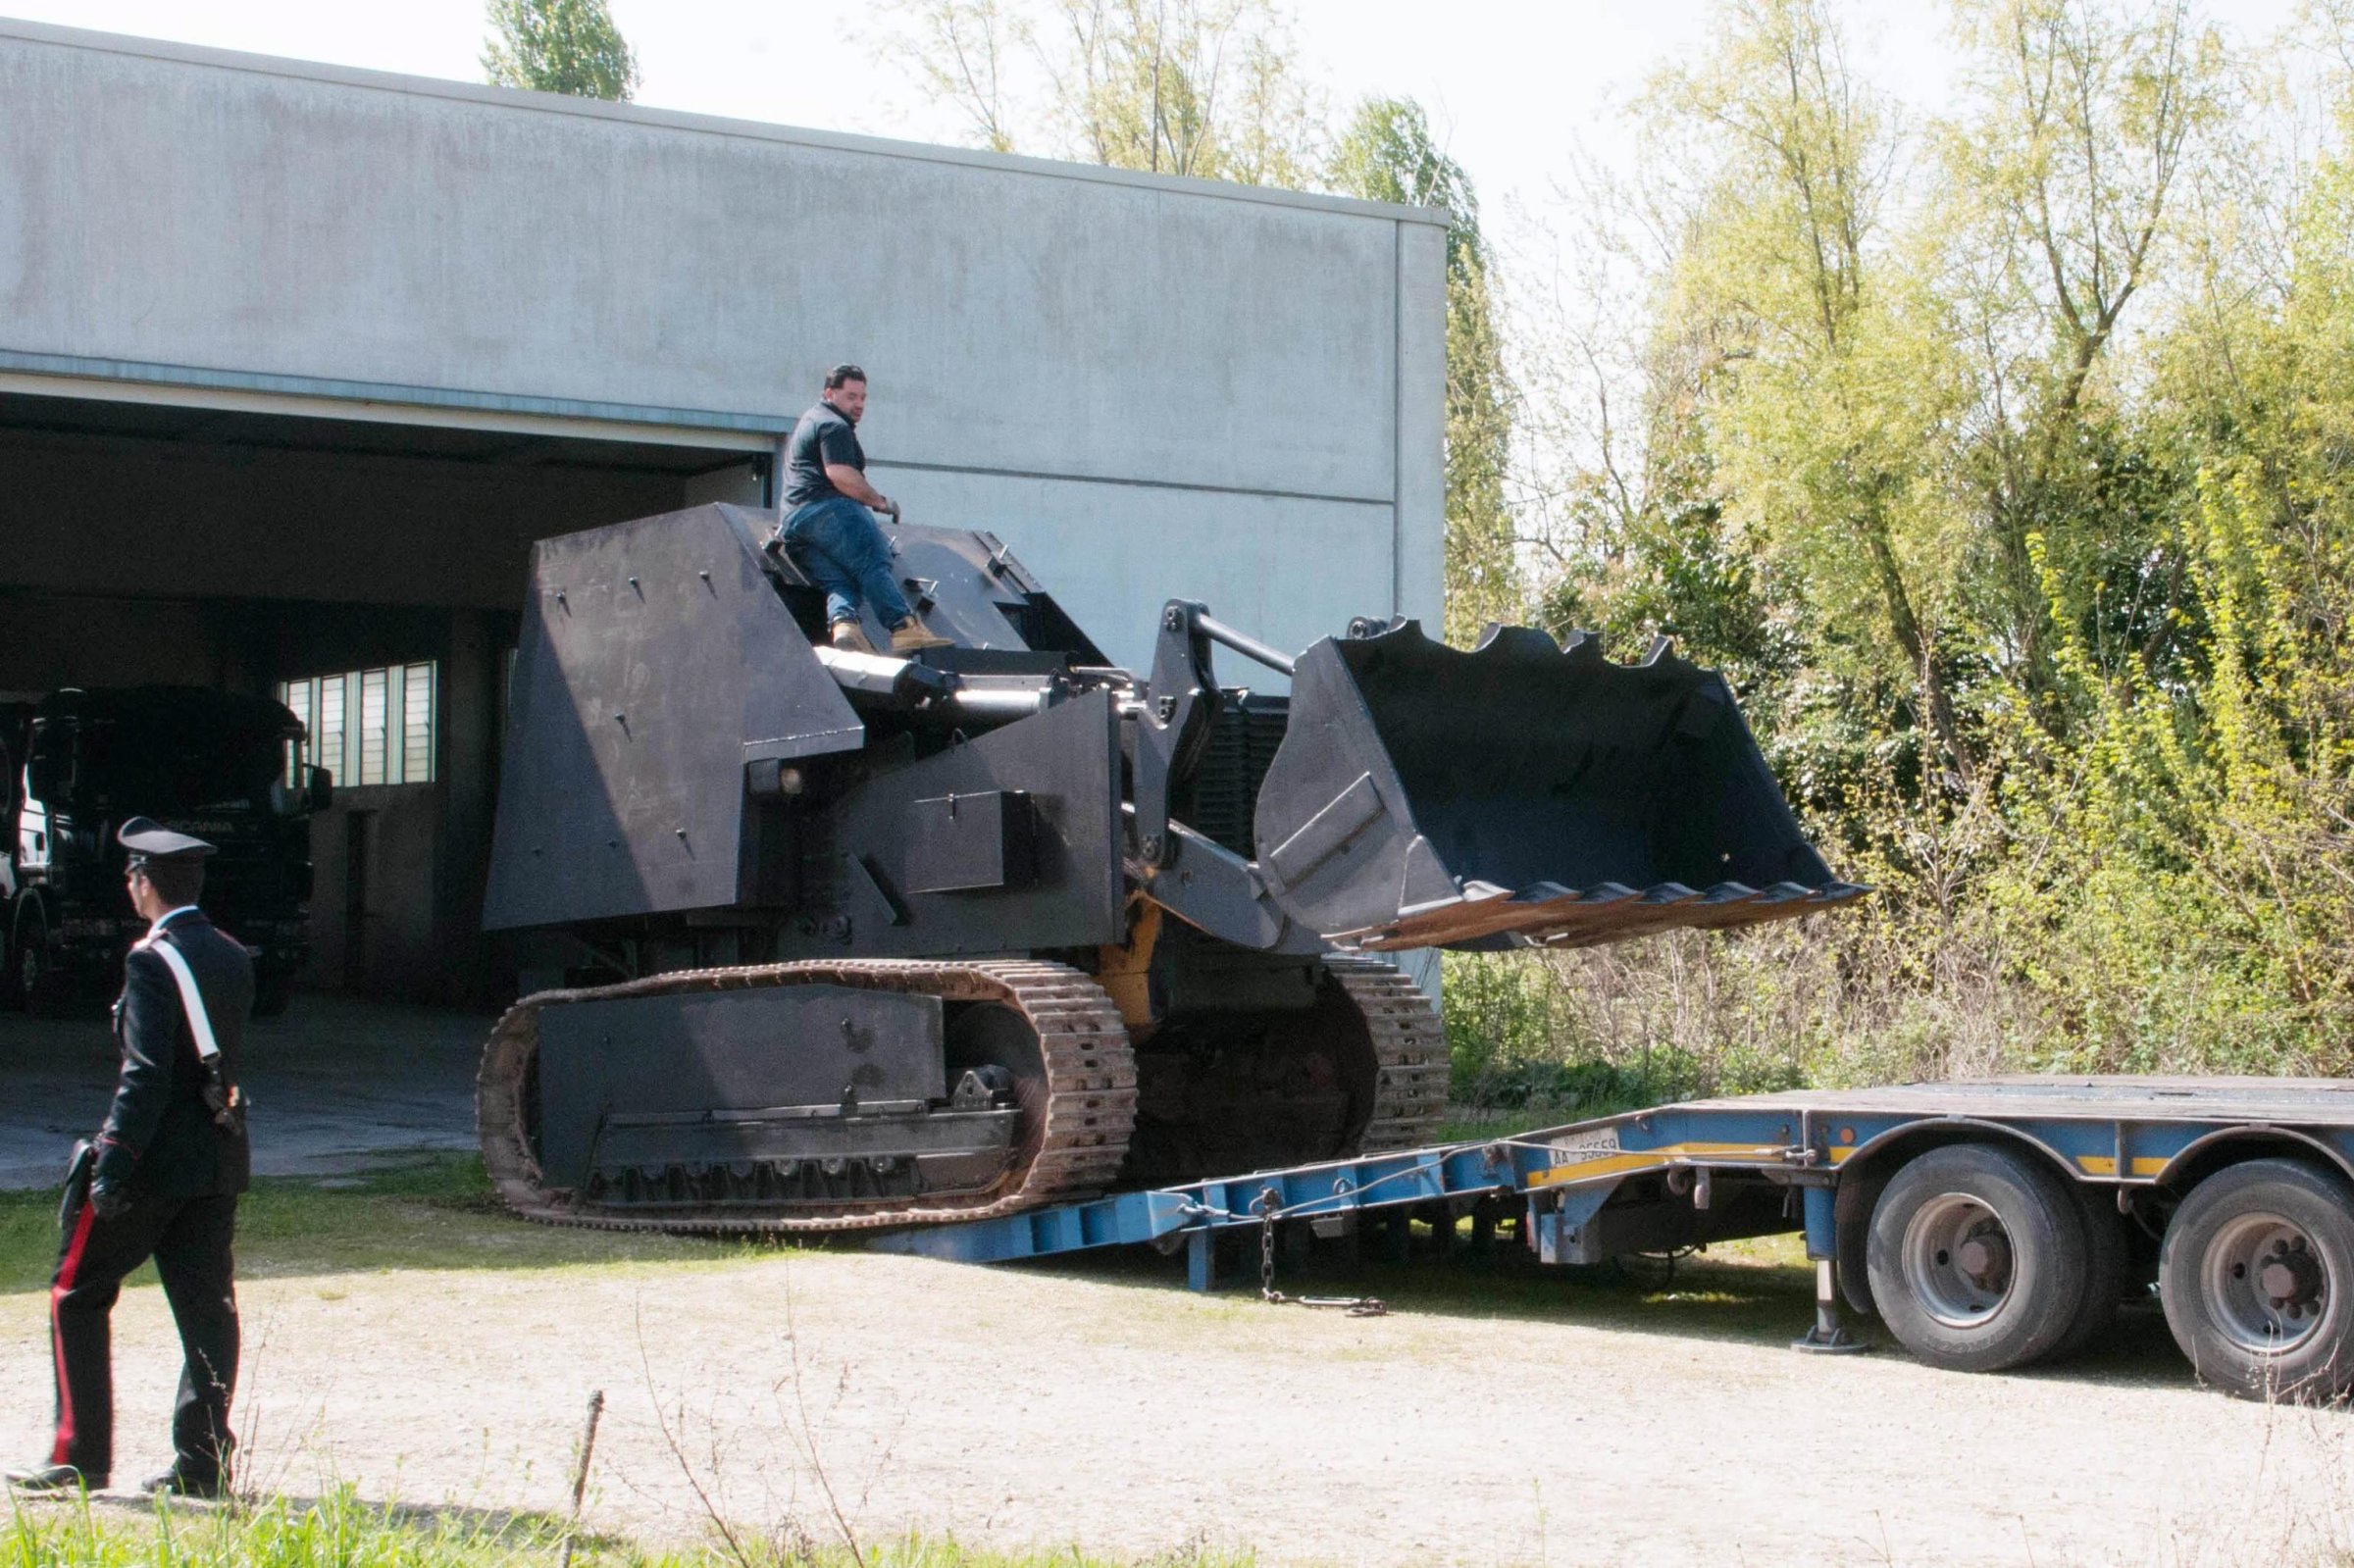 A tractor transformed into a tank is confiscated during an antiterrorism operation in Casale di Scodosia, Veneto region, Italy, on April 2, 2014.